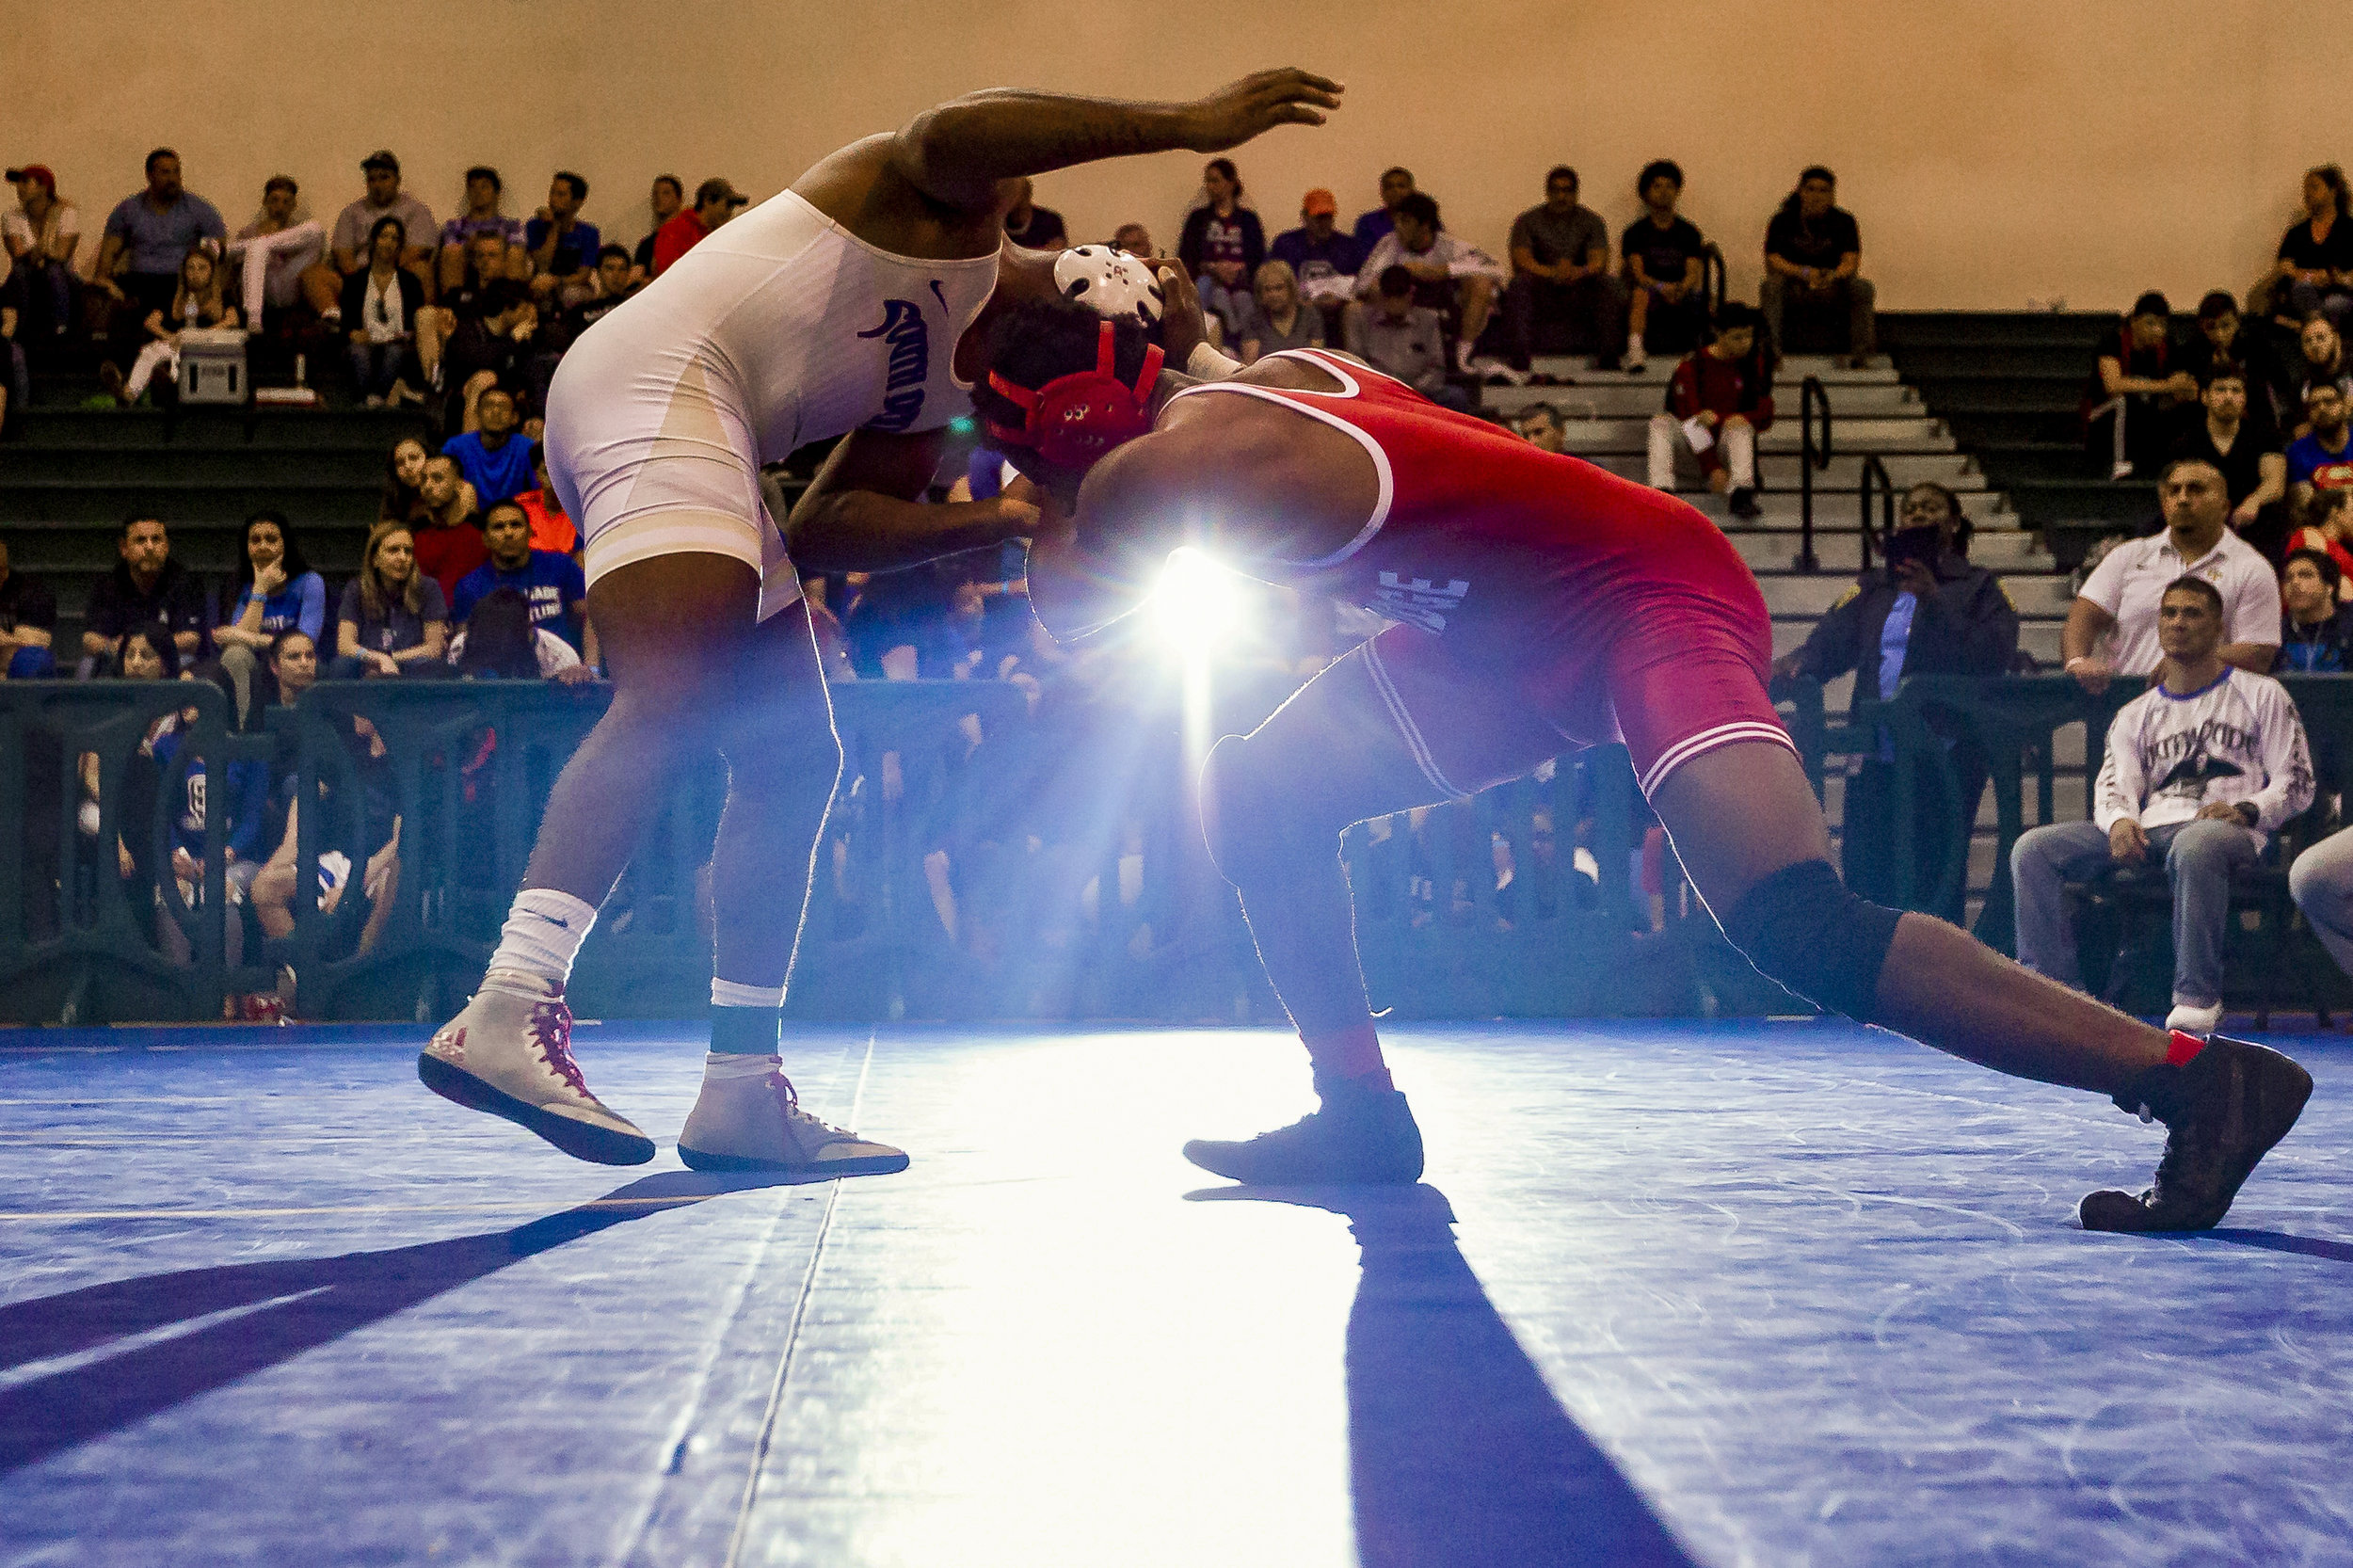  Corey Harvey, from South Dade, left, wrestles against Leonard Wooten, from Southridge, during a 182 weight class Region 4-3A wrestling finals at Ronald W. Reagan Doral Senior High School on Feb. 24, 2018. Harvey won the match. 